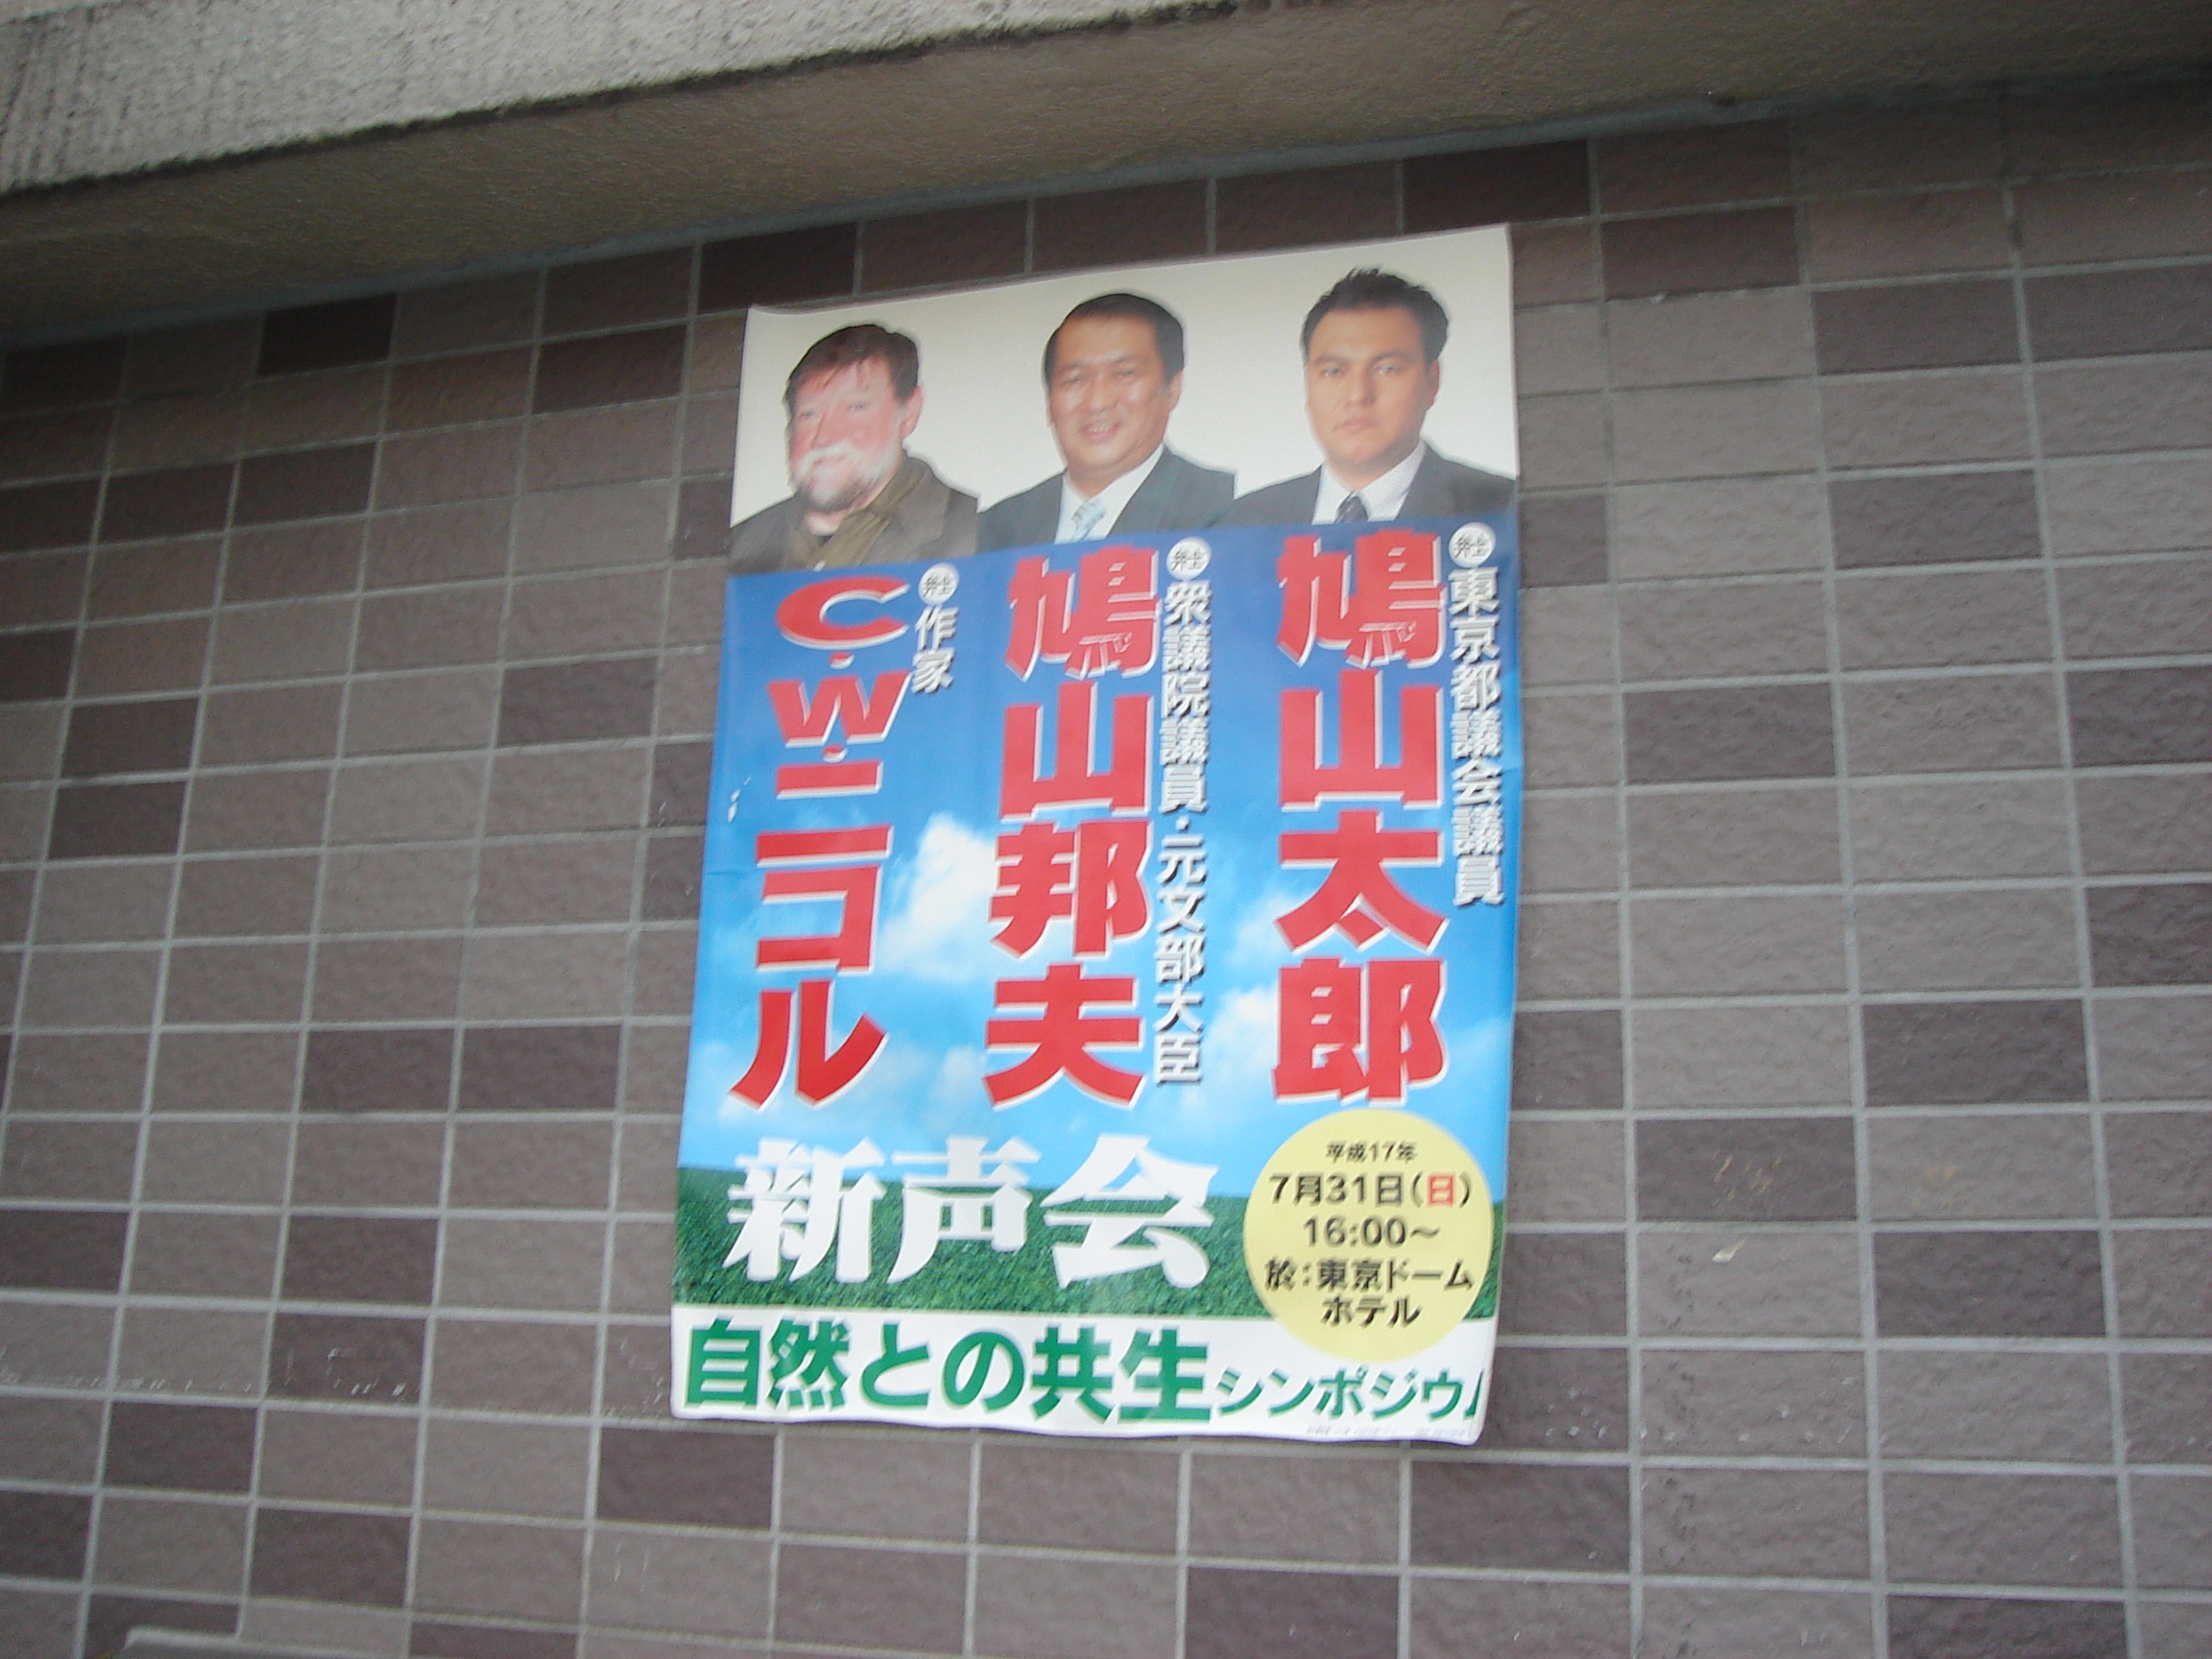 a poster shows three candidates, two japanese and one caucasian